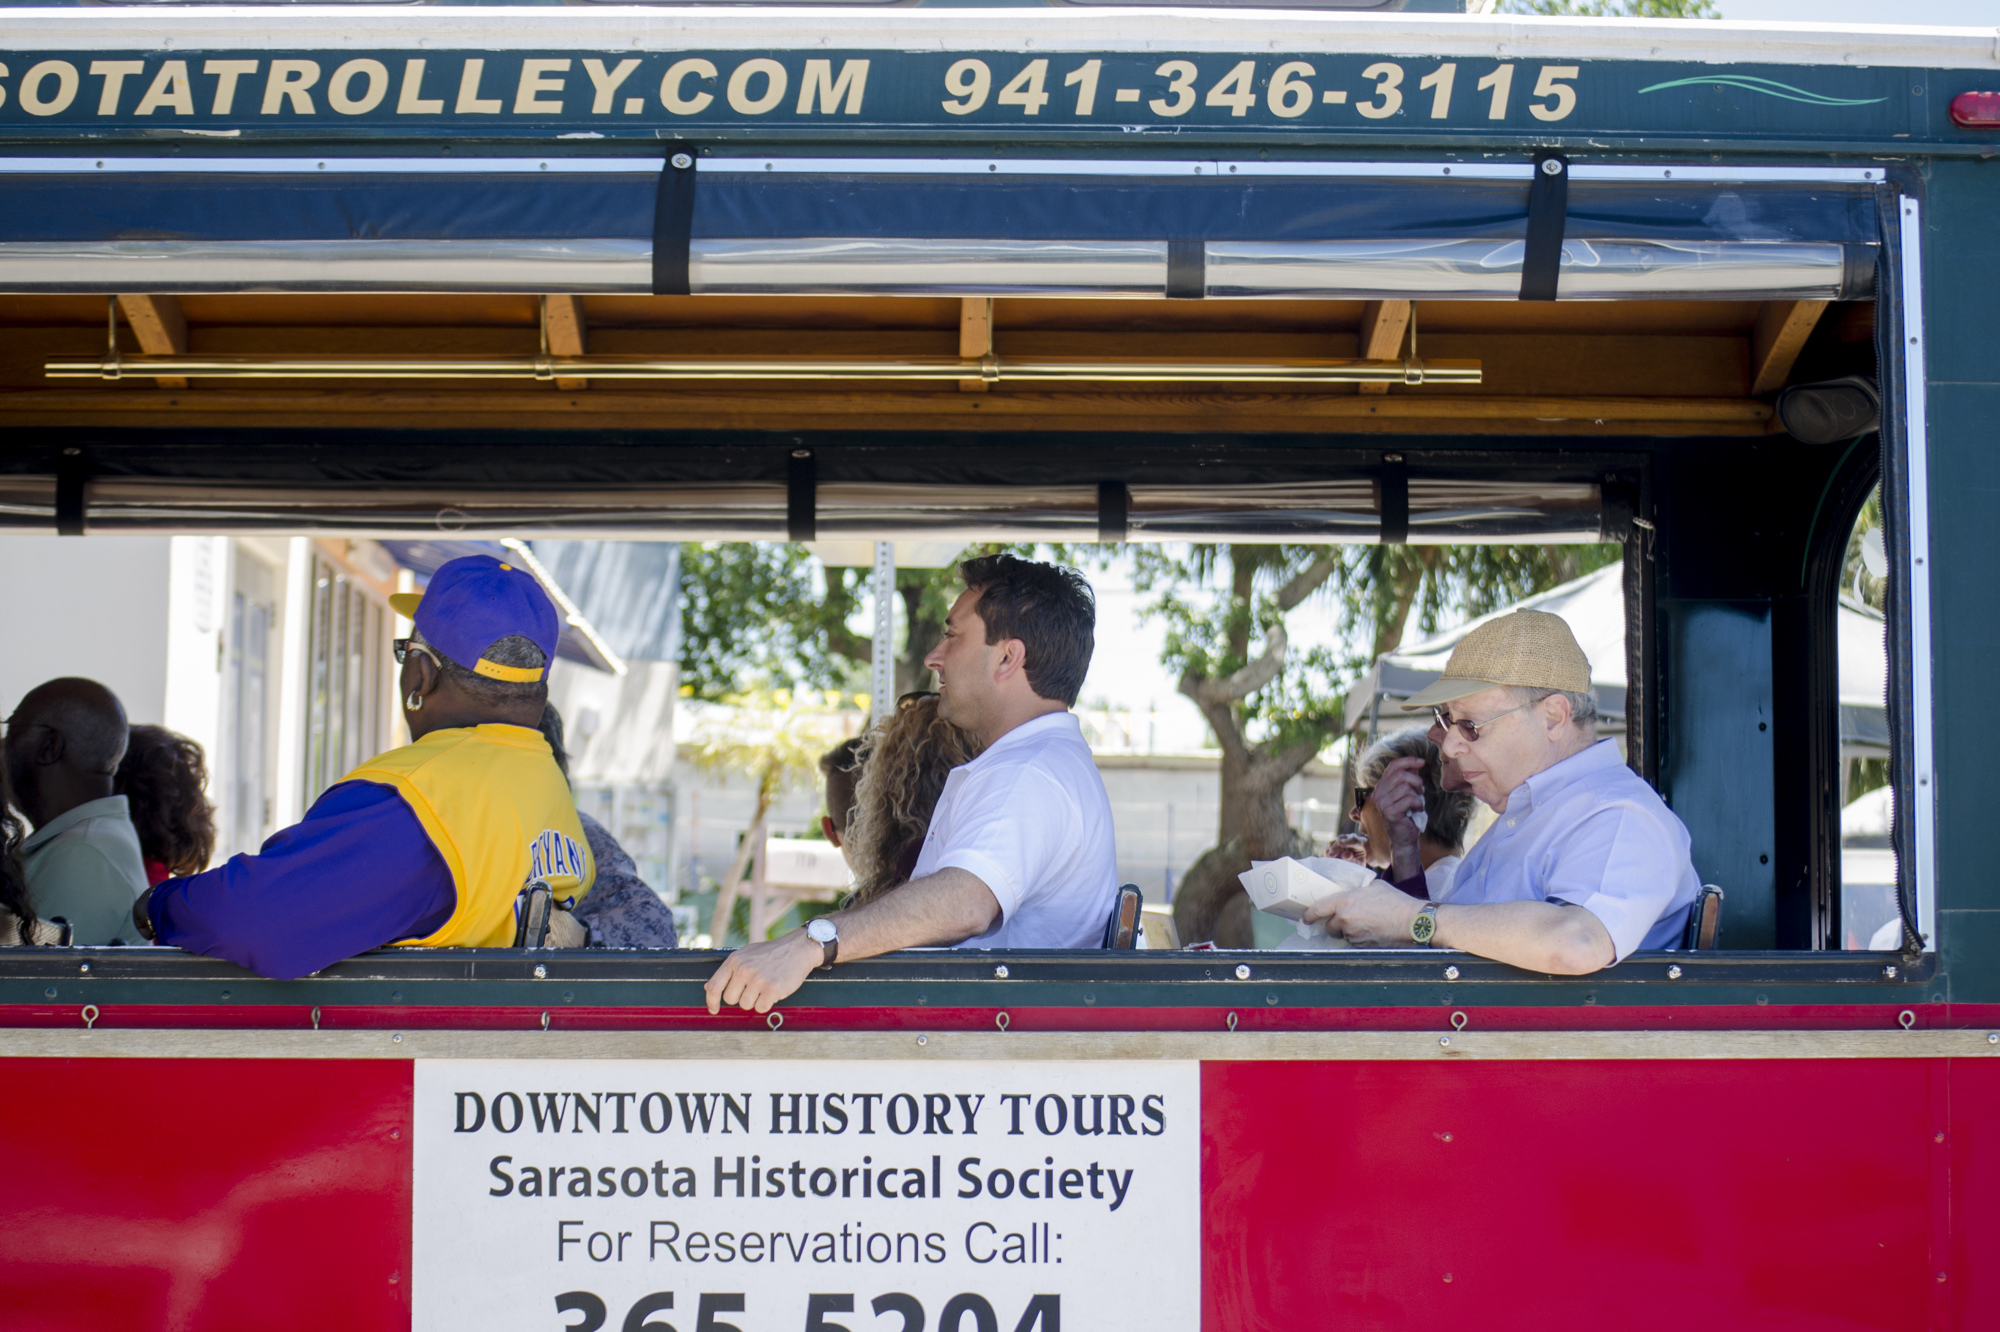 Trolley tours of Newtown was a project that received funding from the Neighborhood Initiative Grant Program last year, to showcase the community's history.